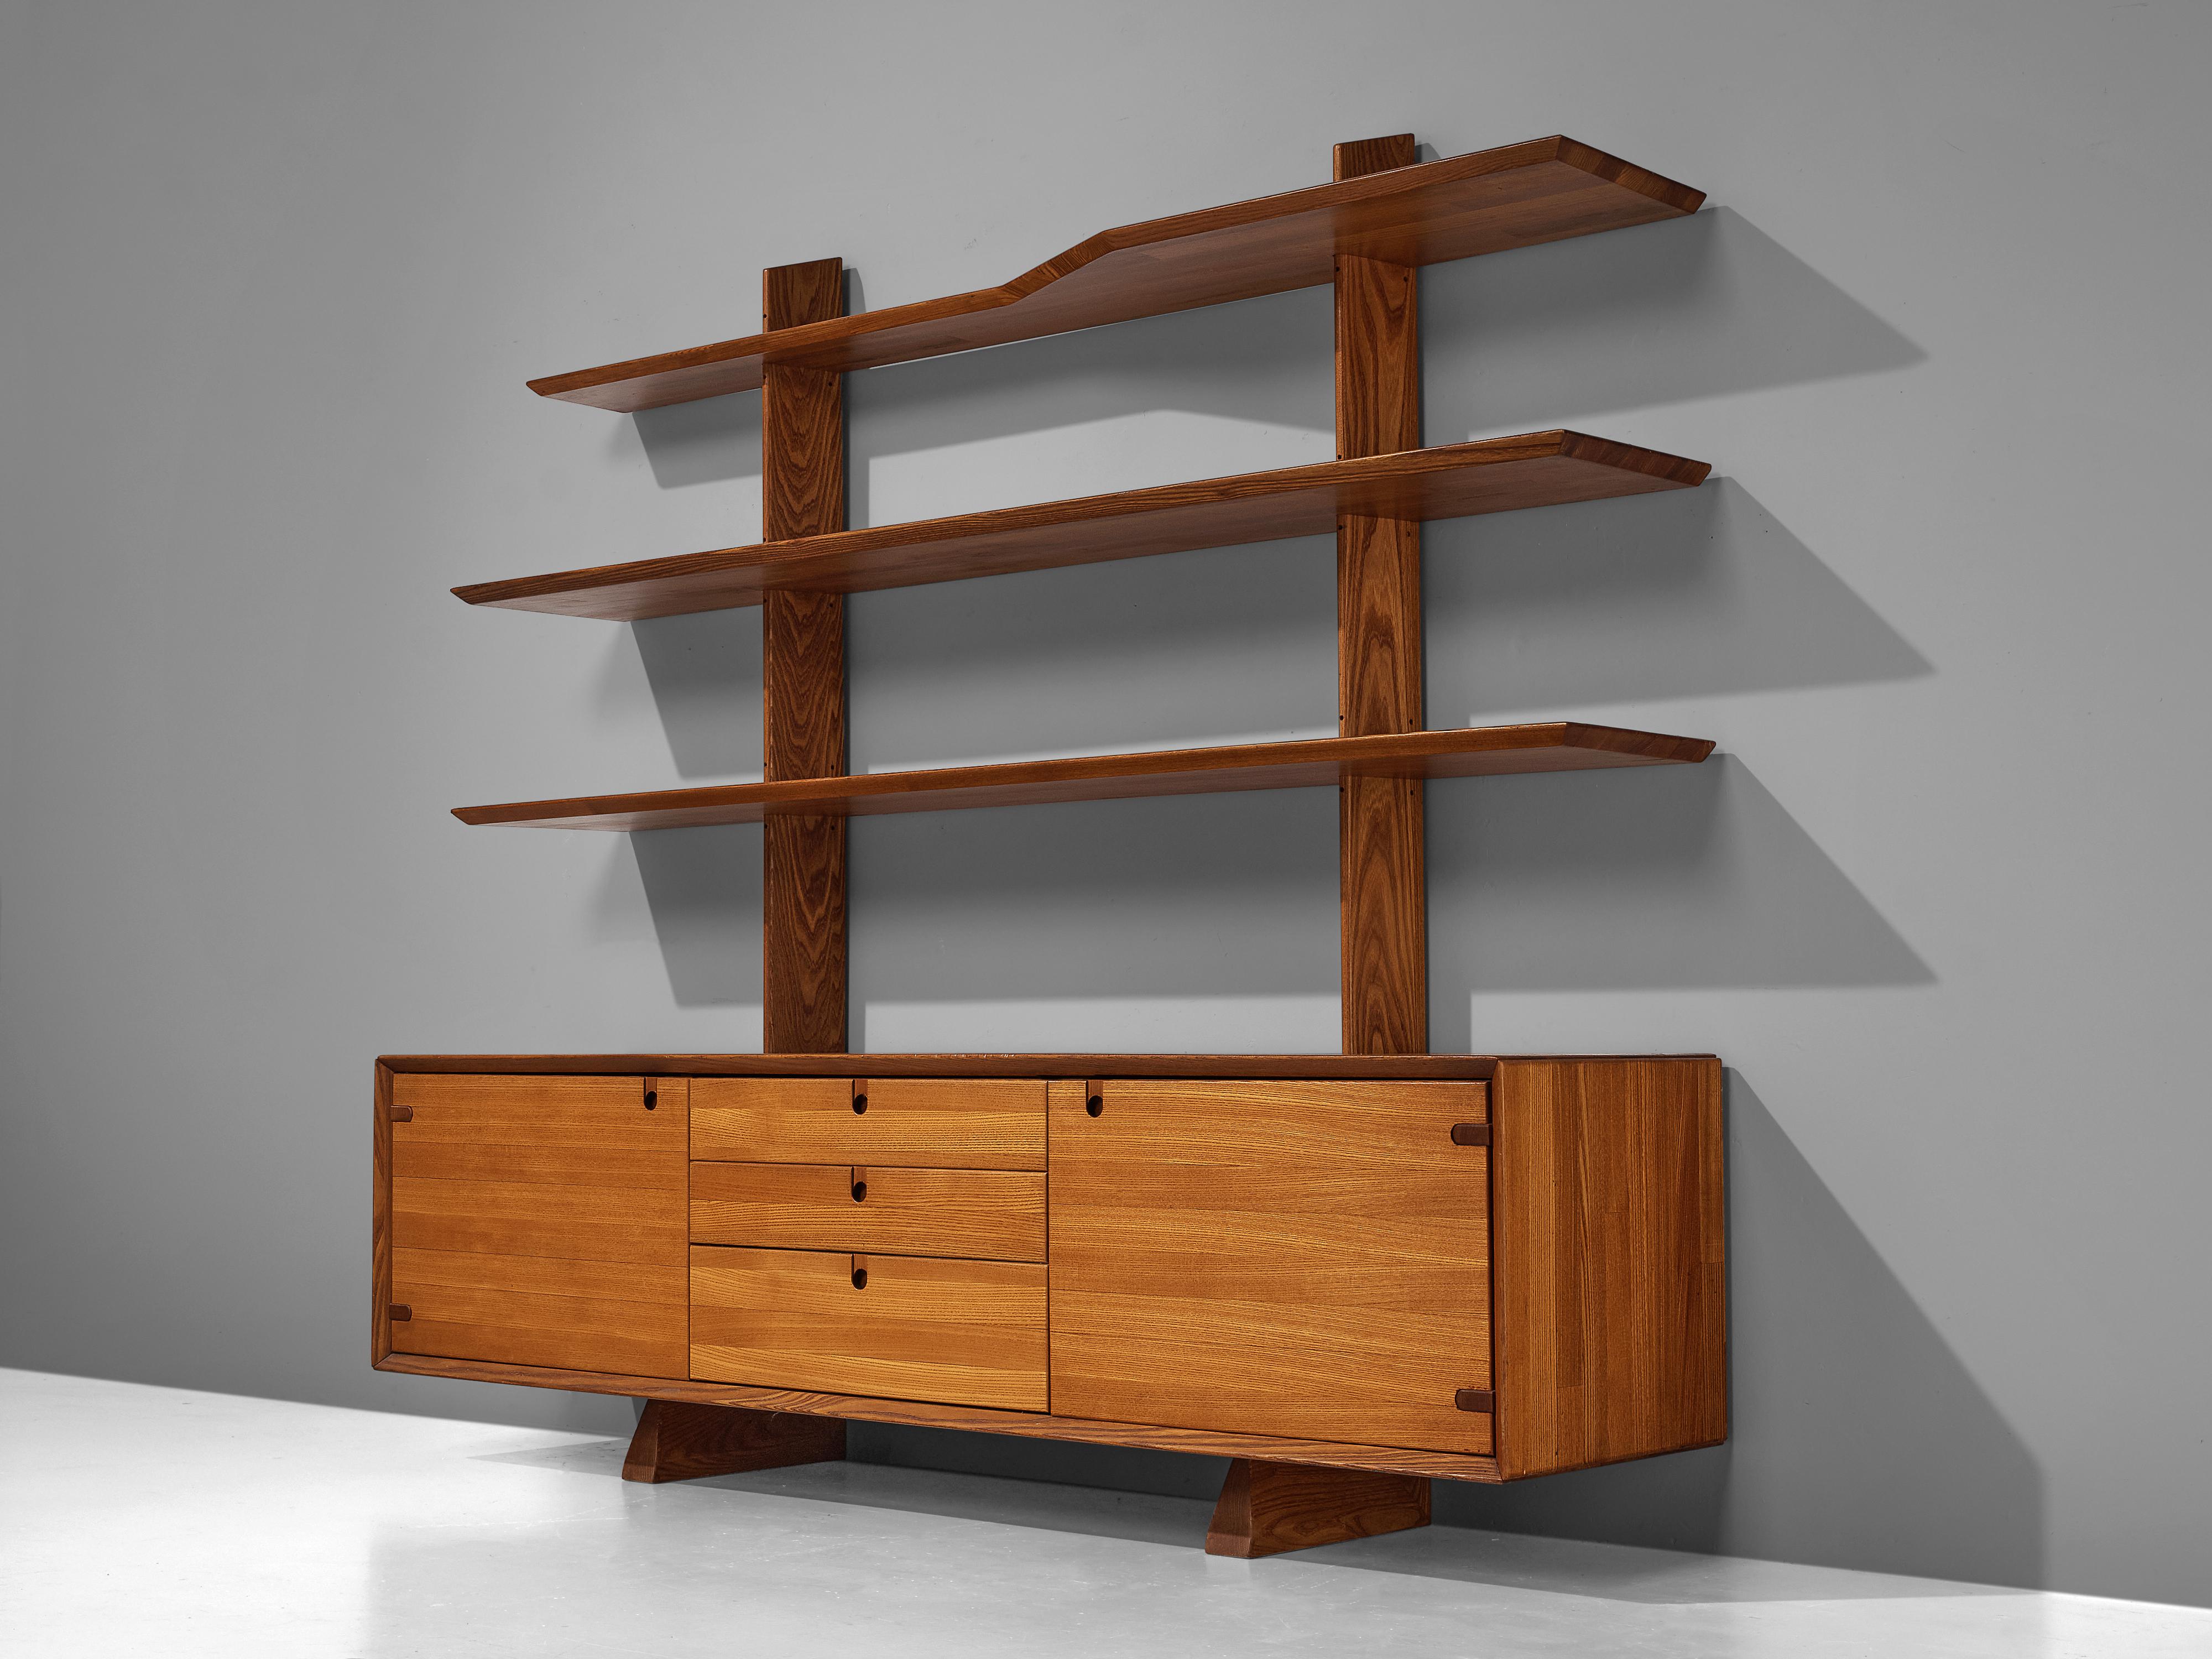 Highboard, elm, France, 1960s

This robust and solid highboard consists of three elm shelves that rest on top of a cabinet. The base of the piece has two doors and three drawers. Therefore, it is a vividly designed piece that is both functional and